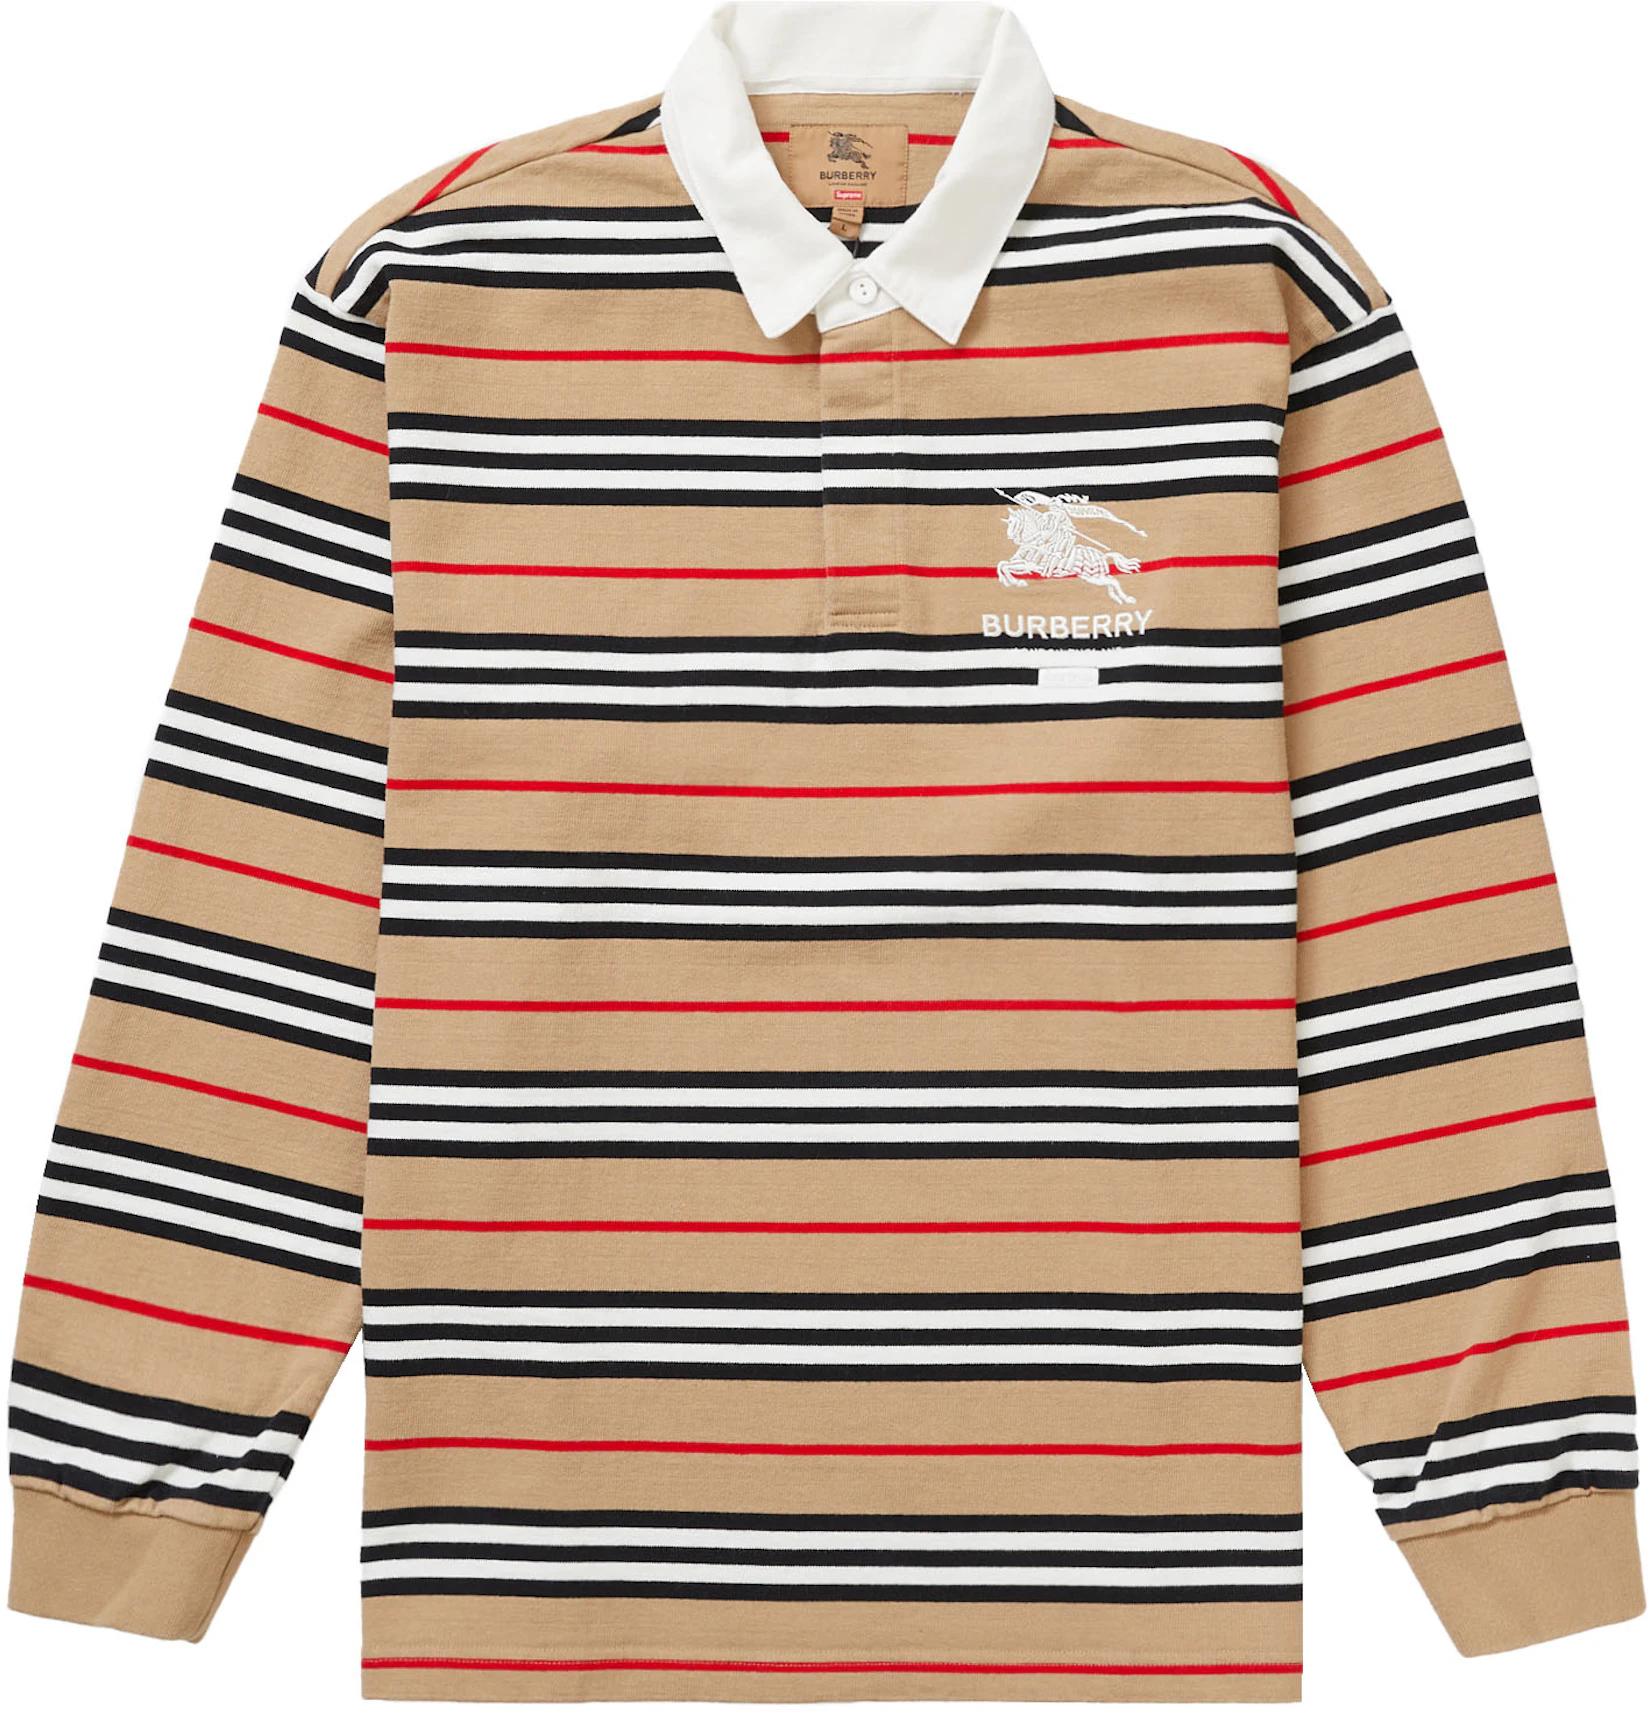 Top 67+ imagen burberry supreme rugby